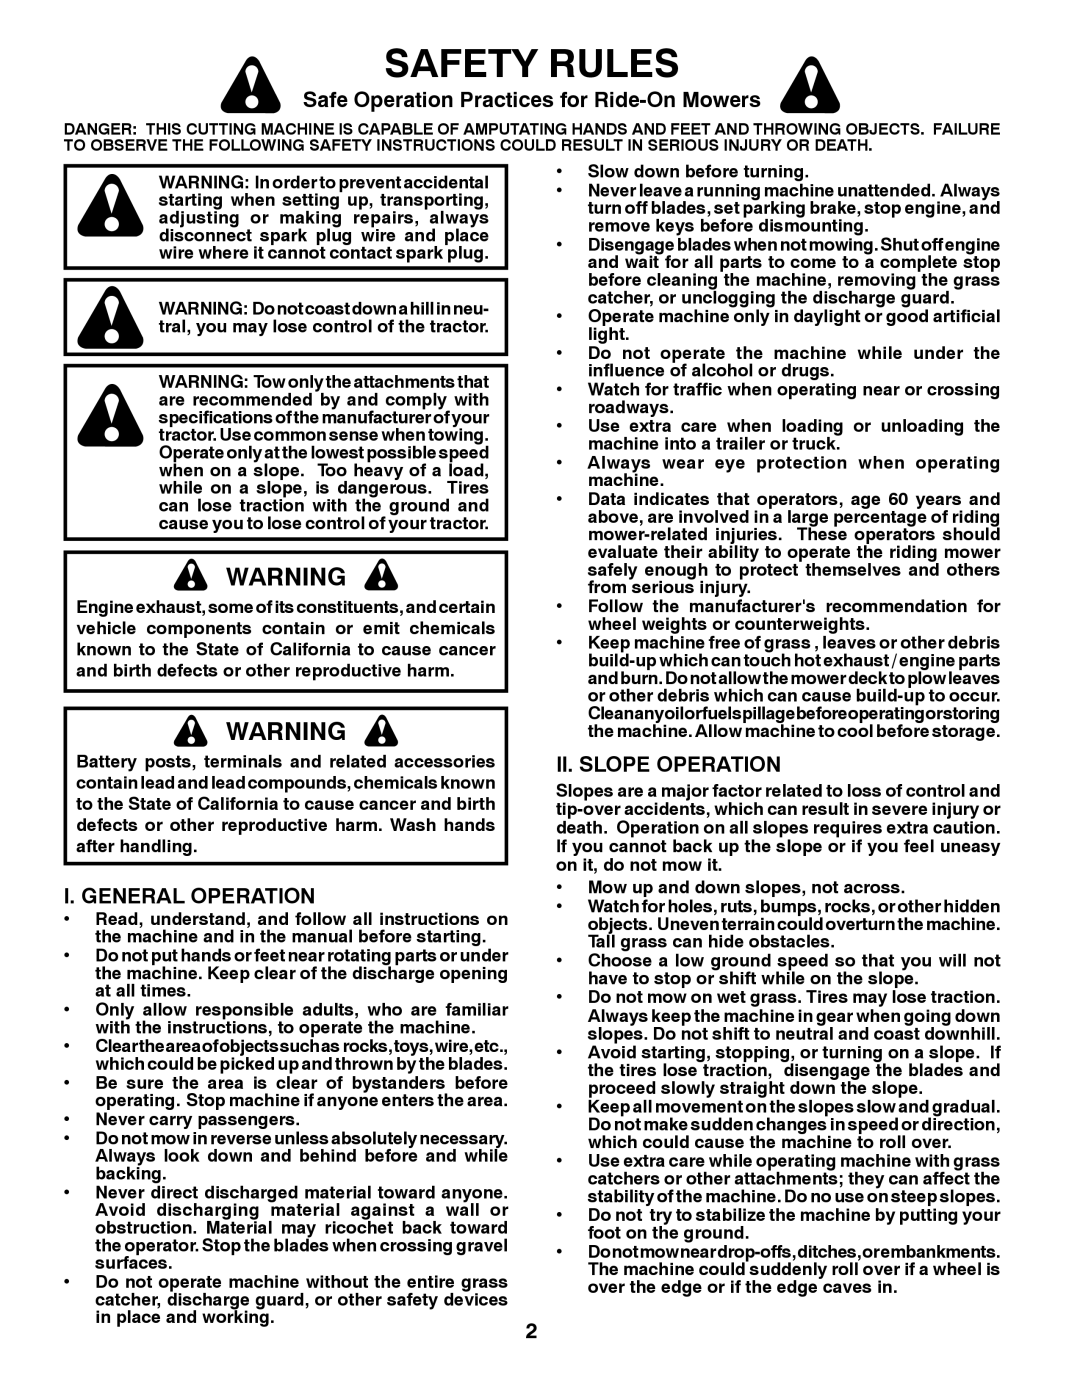 Poulan 424368 manual Safety Rules, Safe Operation Practices for Ride-On Mowers, I. General Operation, Ii. Slope Operation 